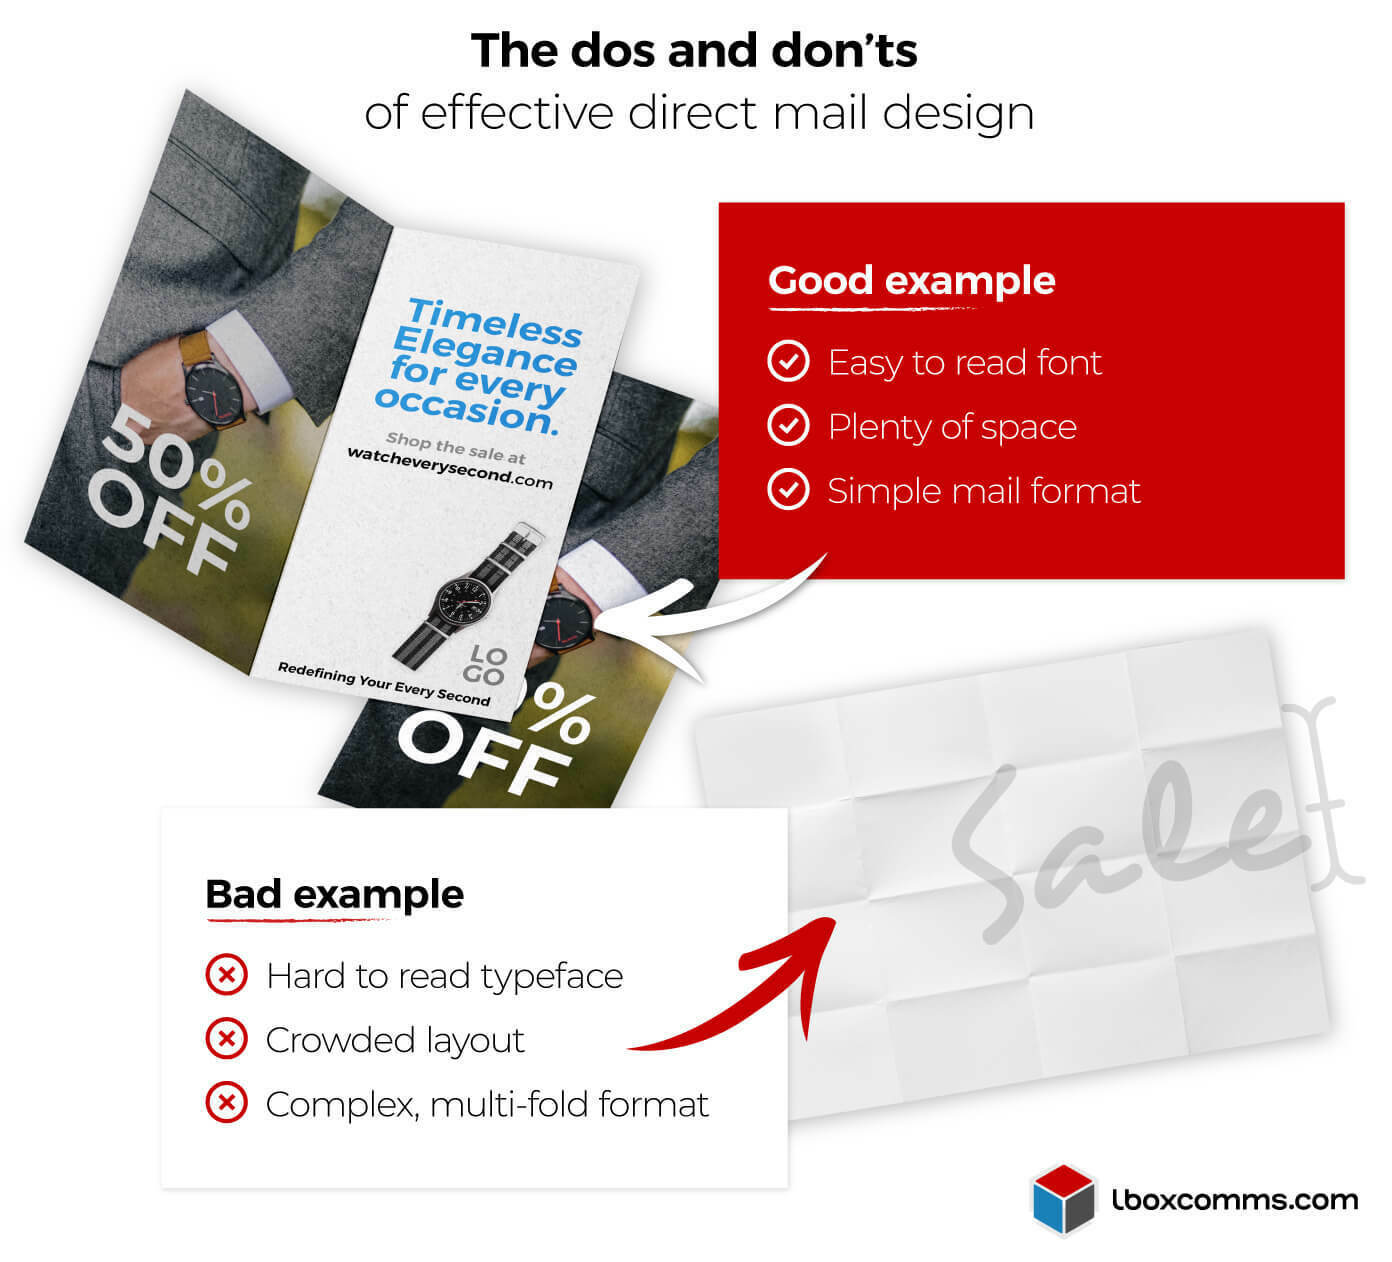 Good and bad direct mail design examples compared - Infographic image